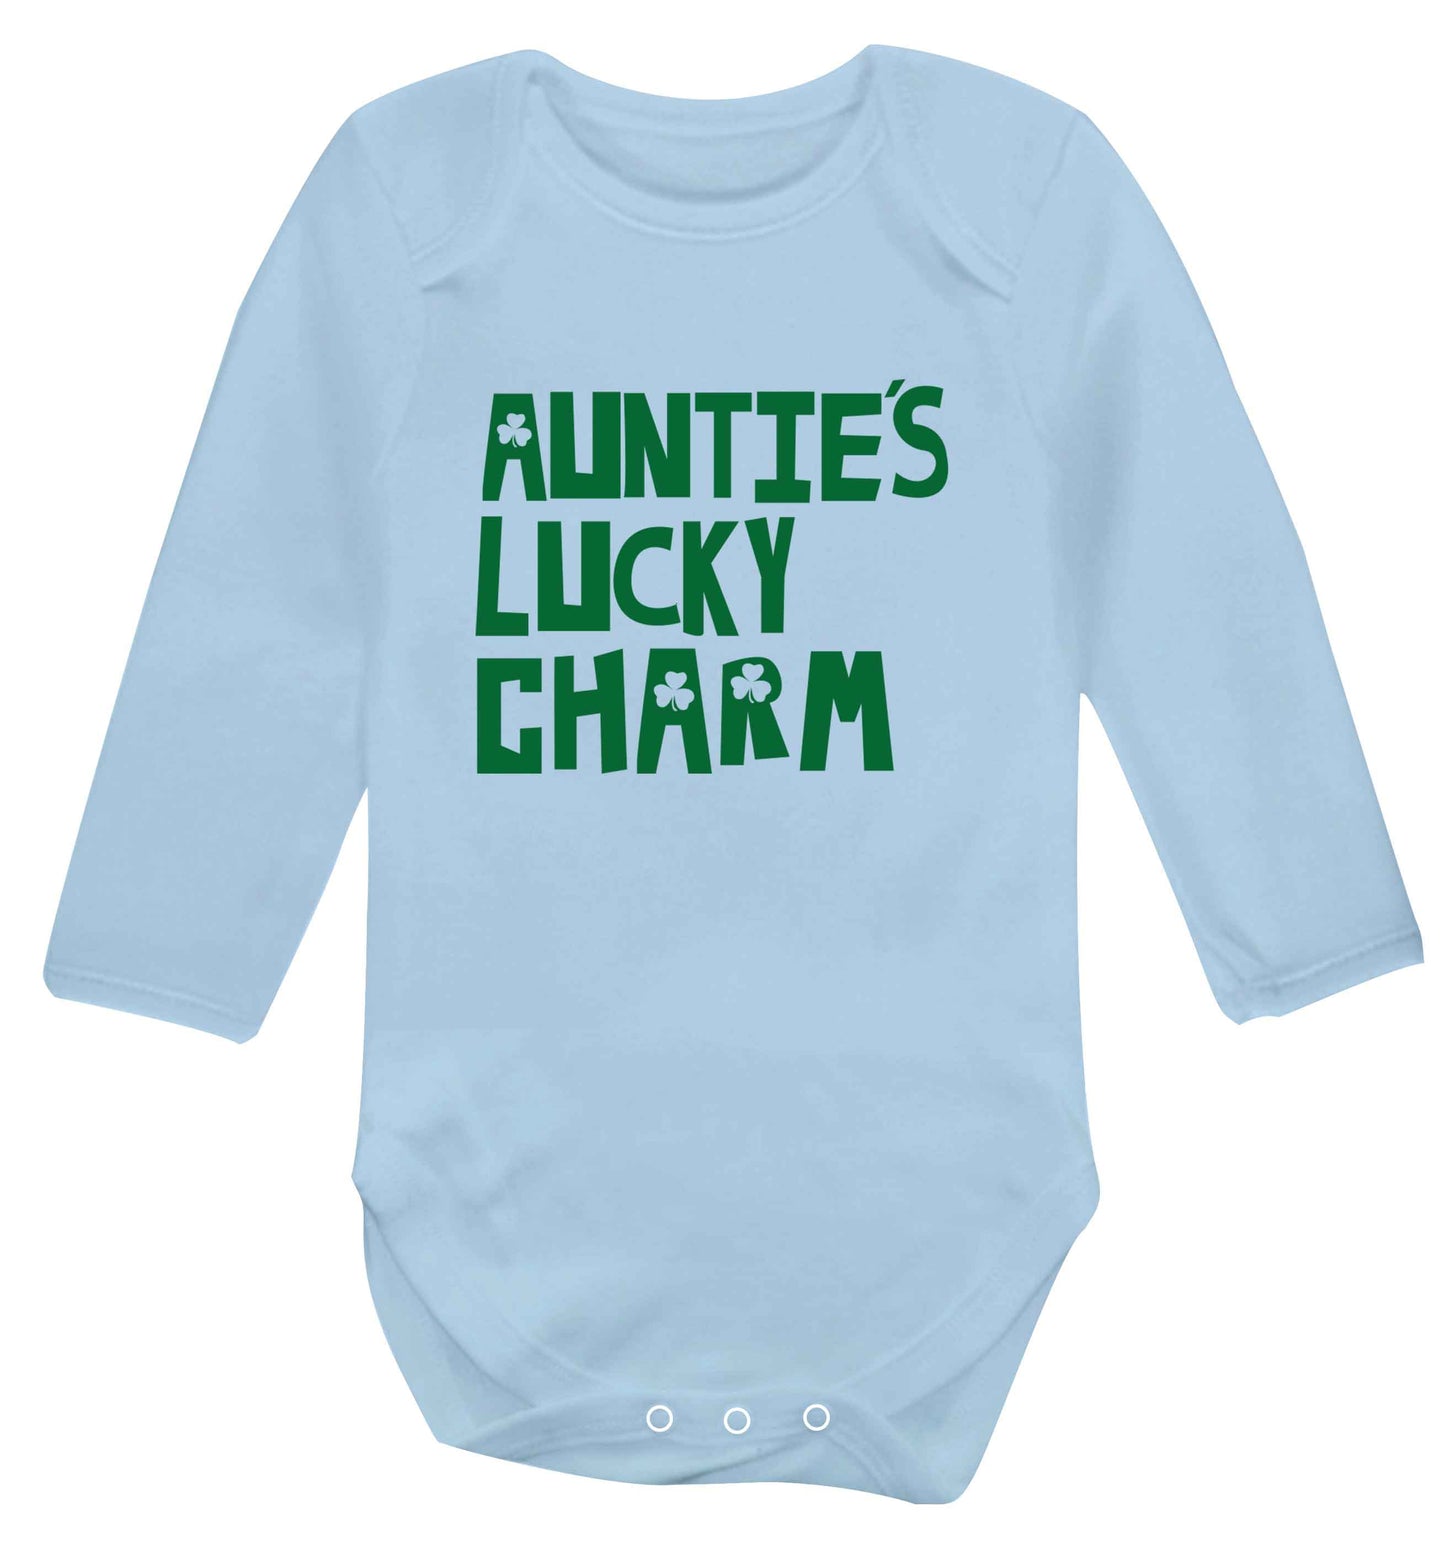 Auntie's lucky charm baby vest long sleeved pale blue 6-12 months